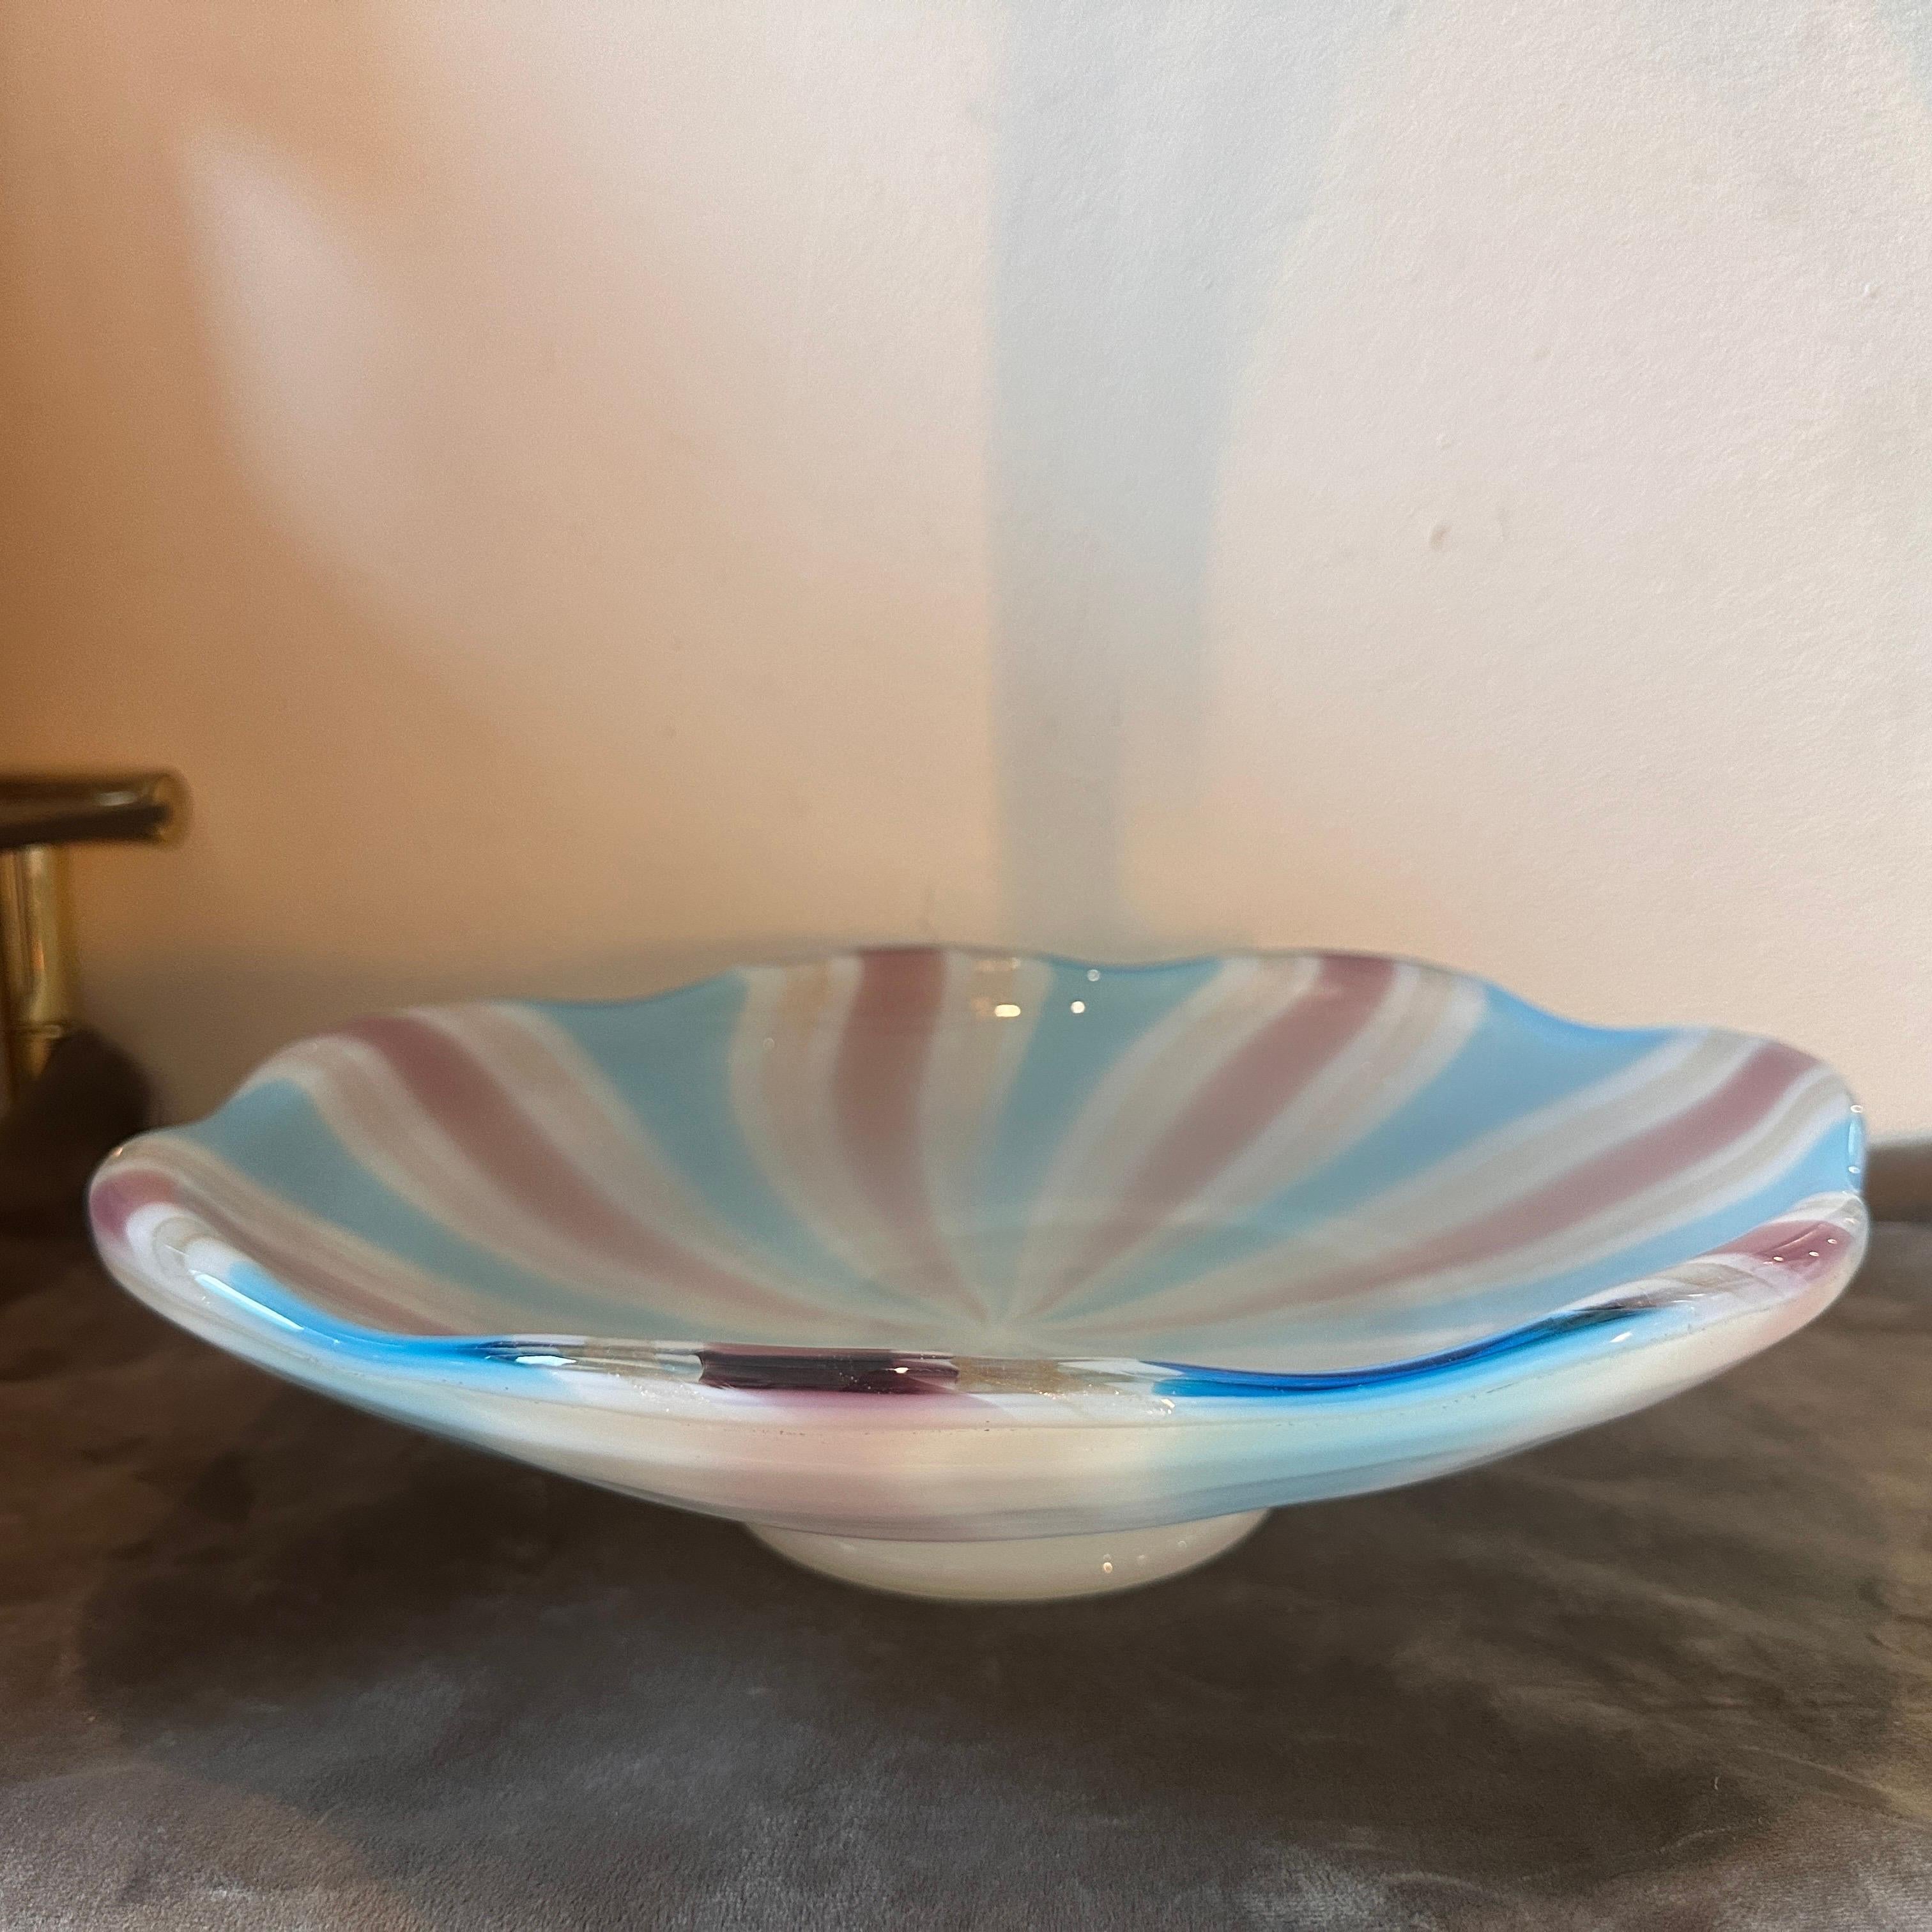 A round centerpiece designed and manufactured in Venice in the Seventies, it's in lovely condition. This bowl a beautiful and potentially valuable piece. Venini's influence on Murano glass design during that era was significant, characterized by